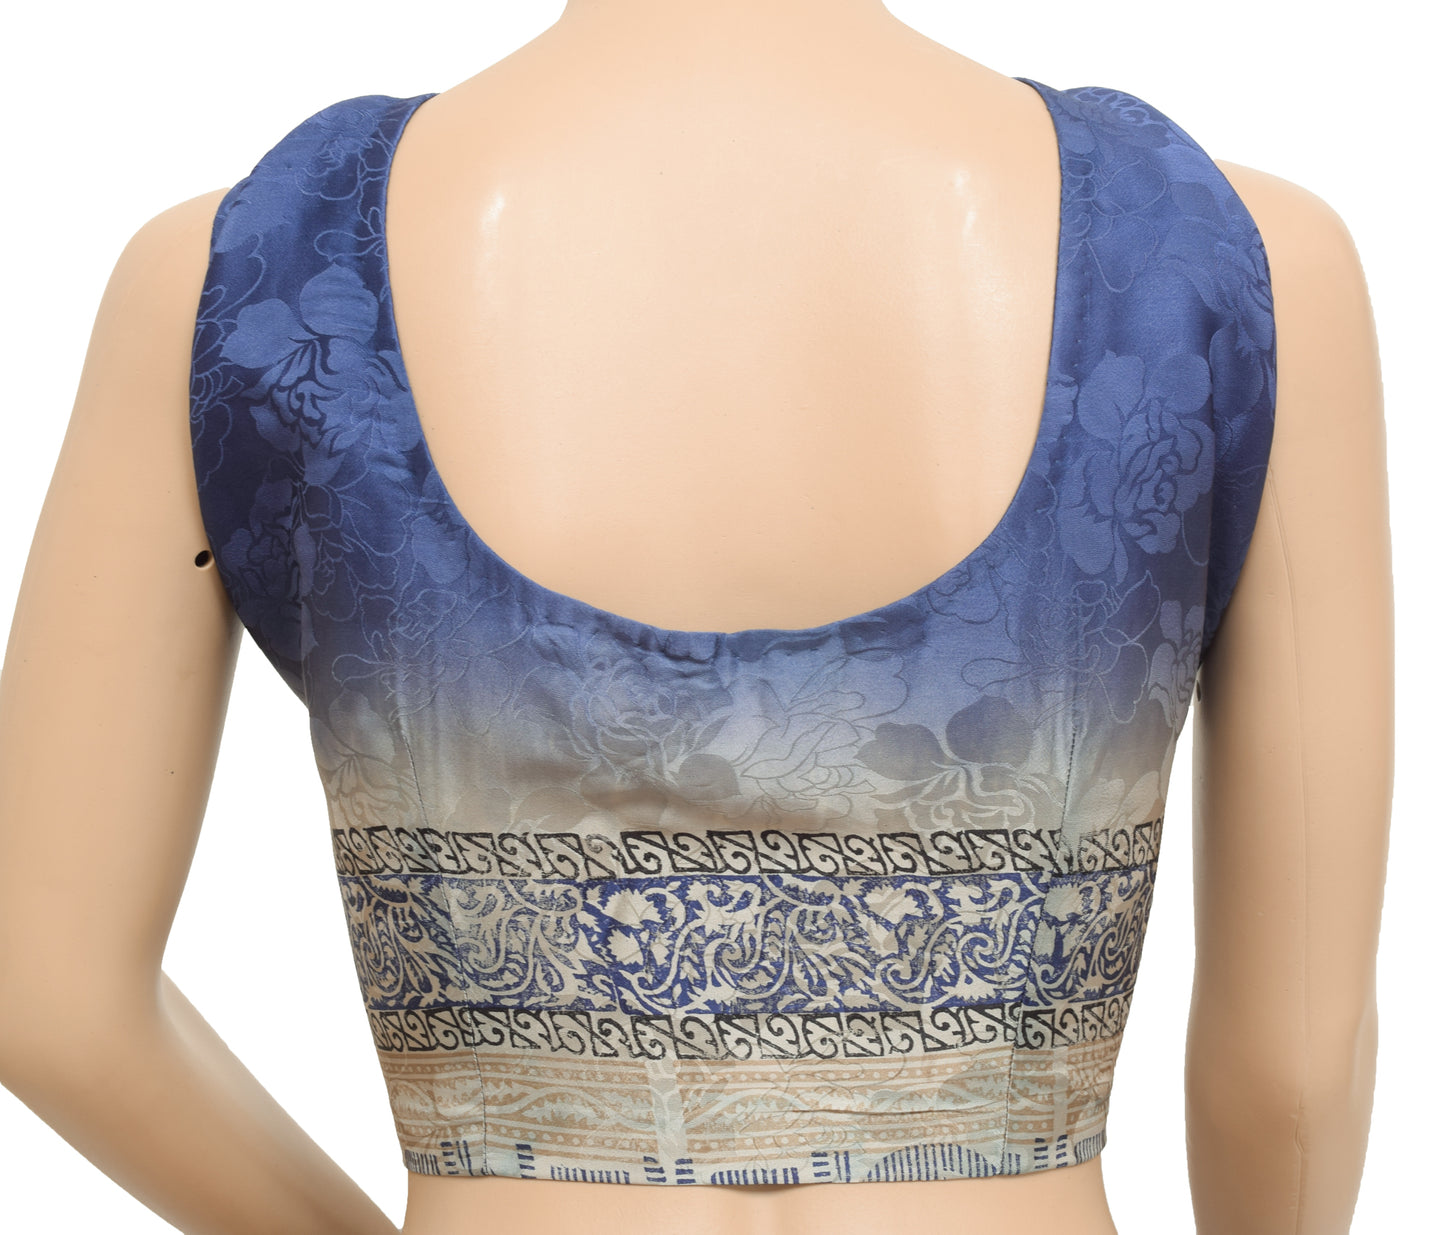 Sushila Vintage Readymade Stitched Blue Sleeveless Sari Blouse Woven Floral Top